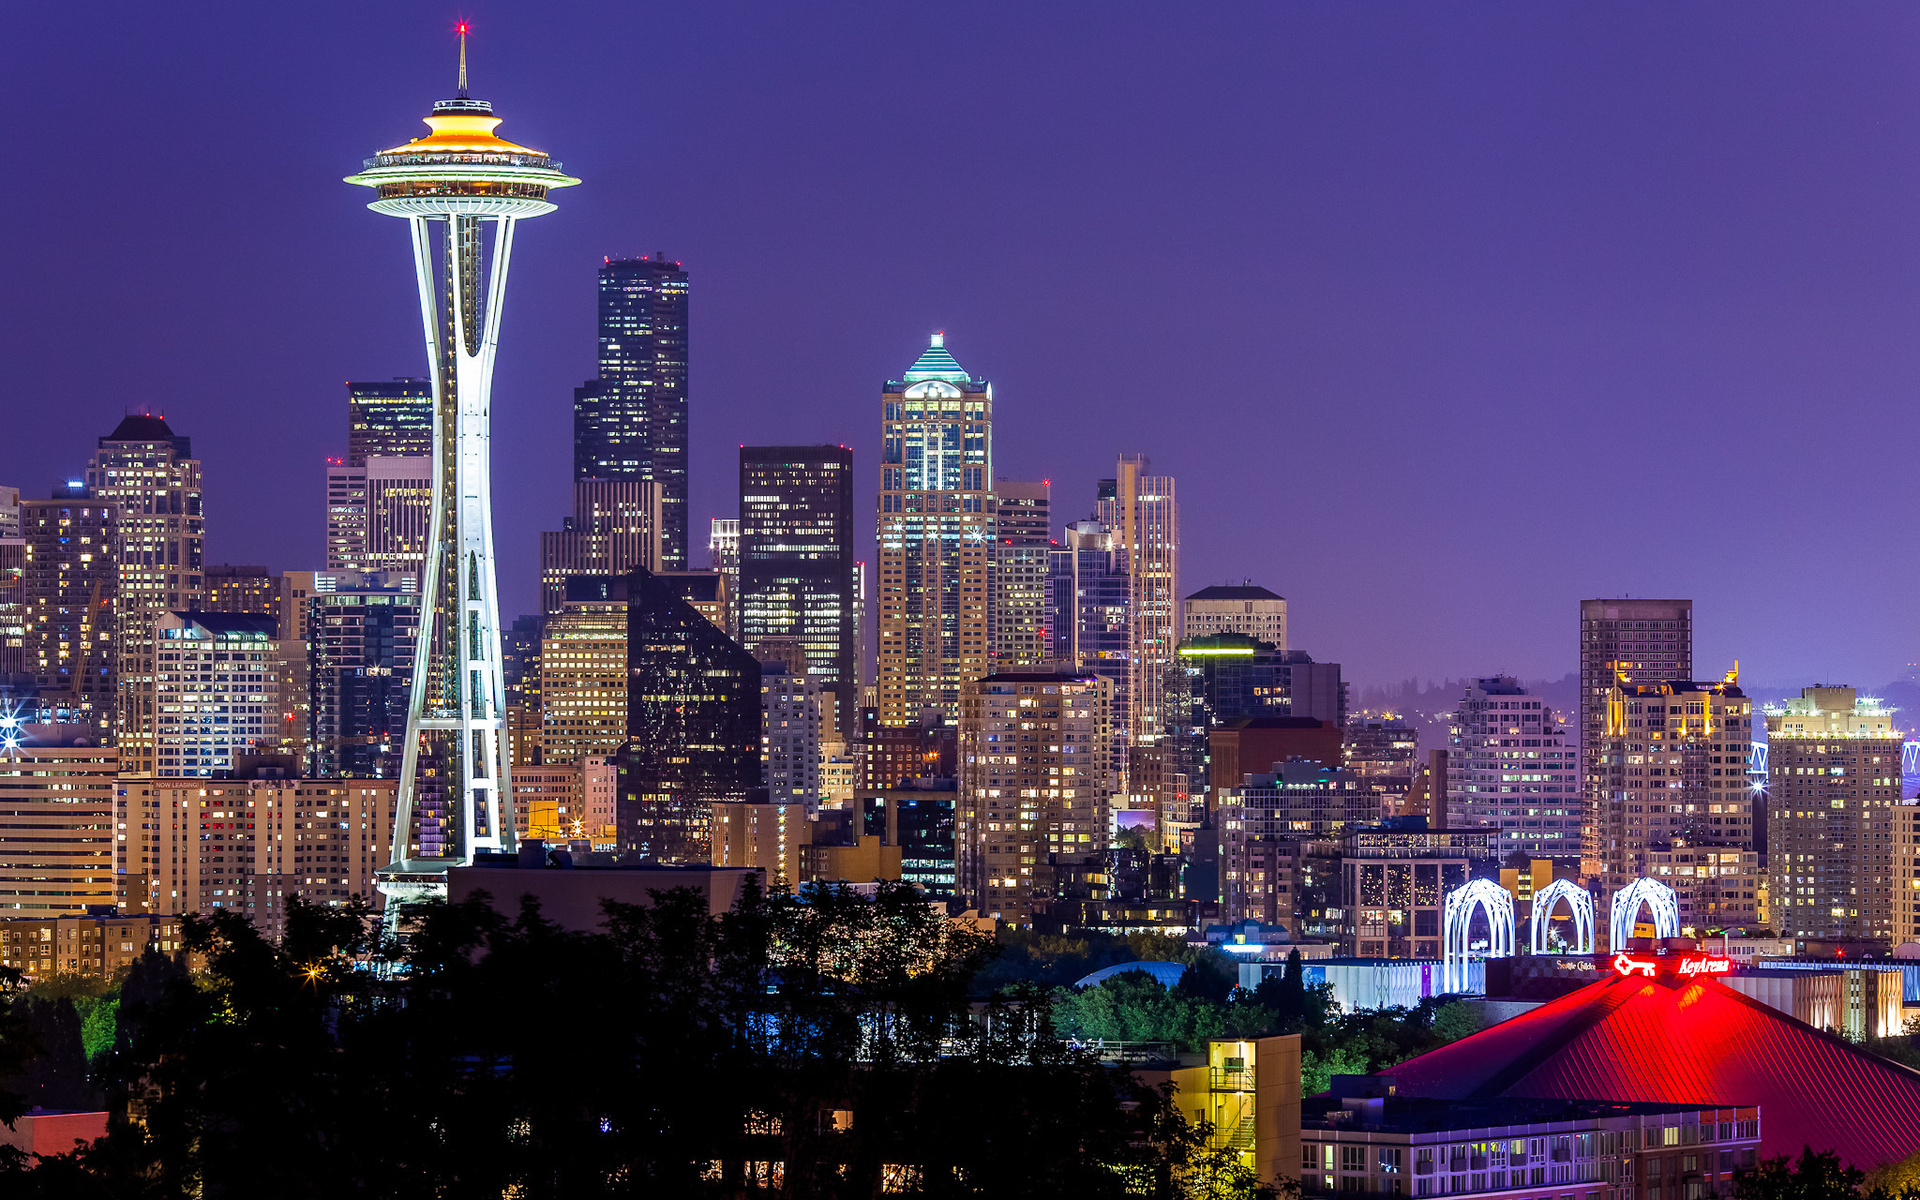 Preety Seattle HD Wallpaper Photos Image And Pics Send By